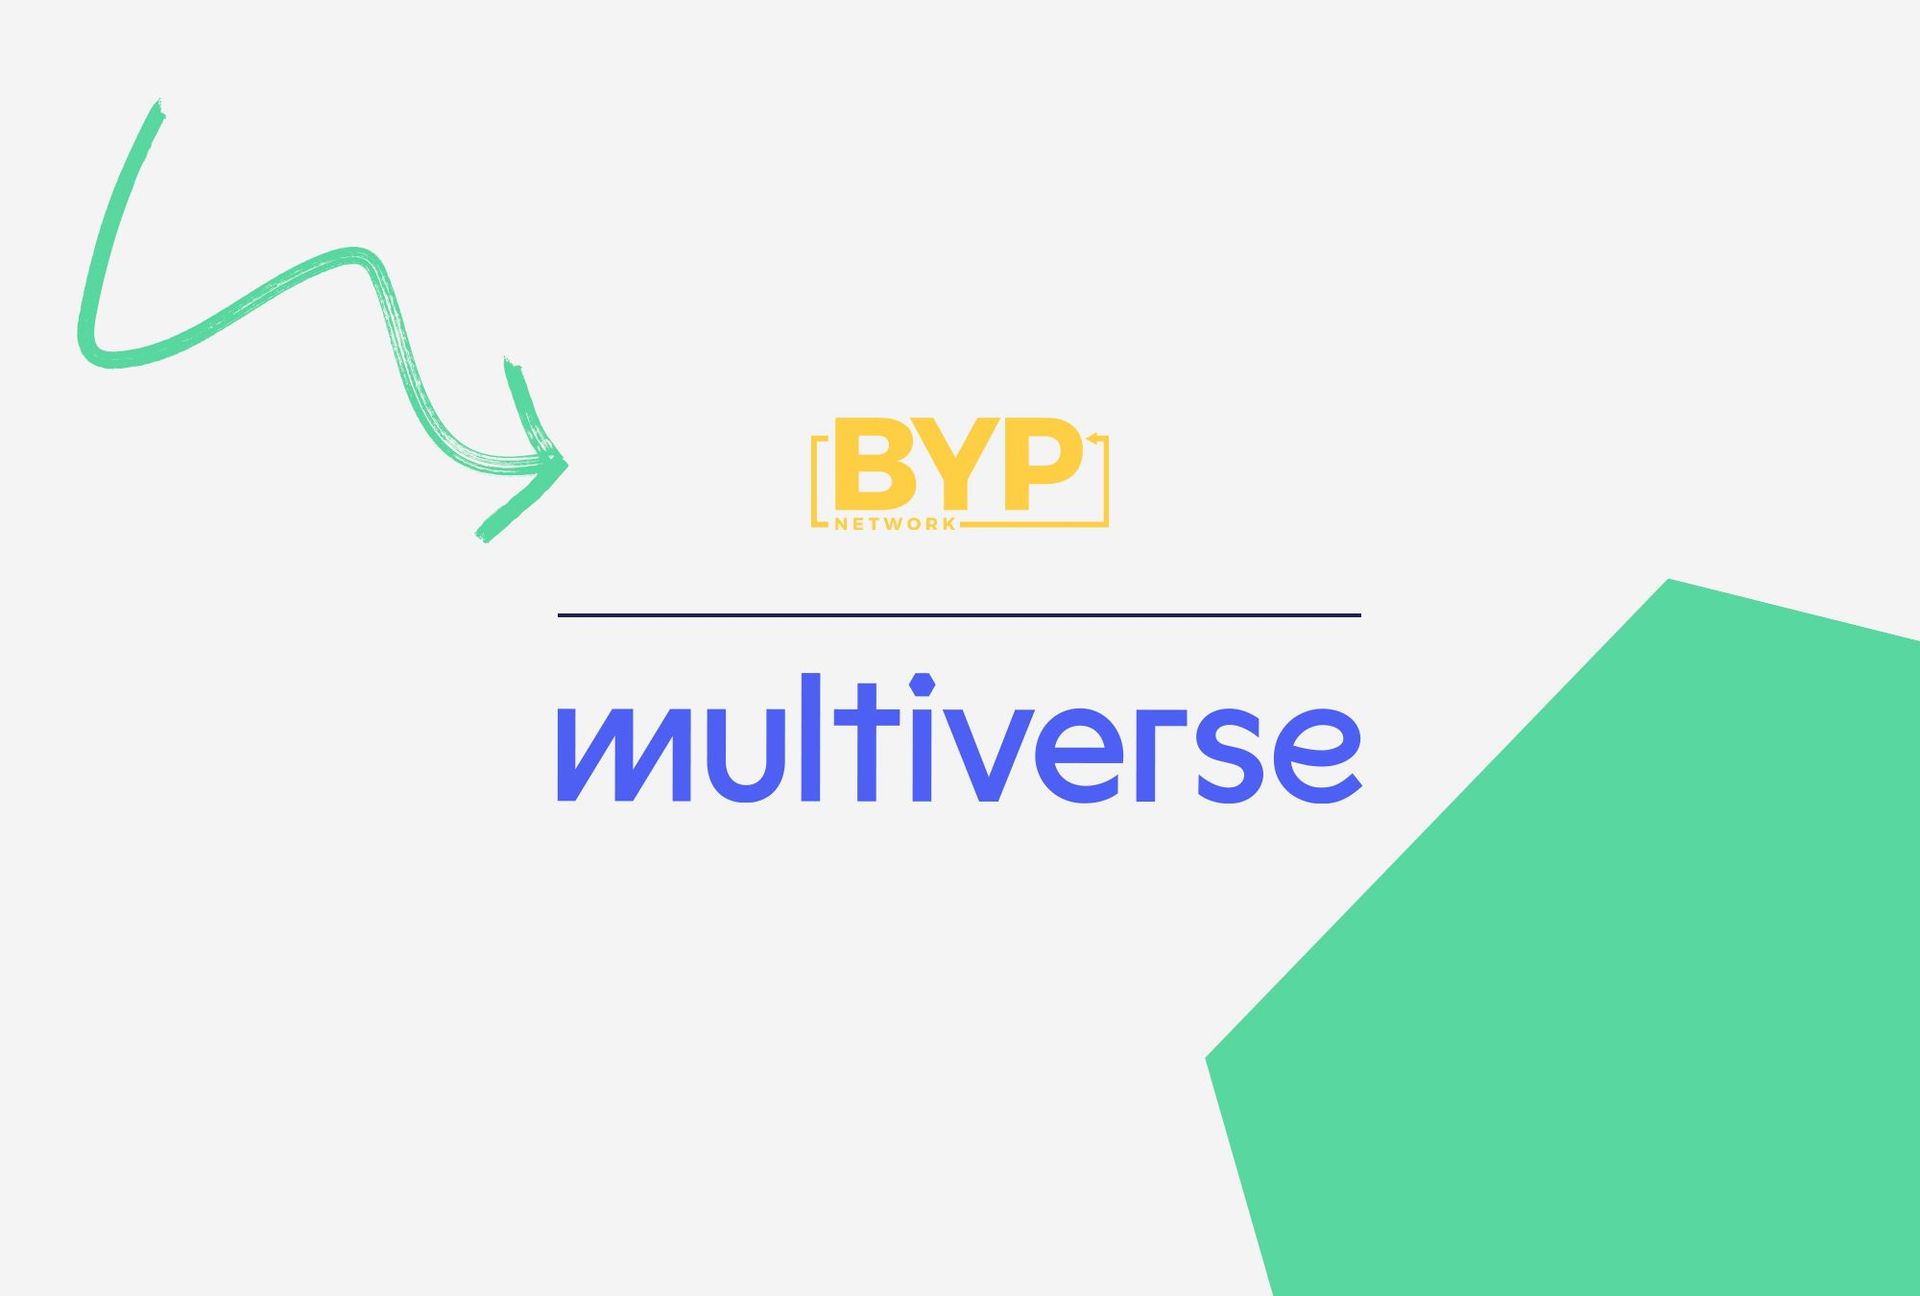 A blue and green graphic with BYP and Multiverse logos